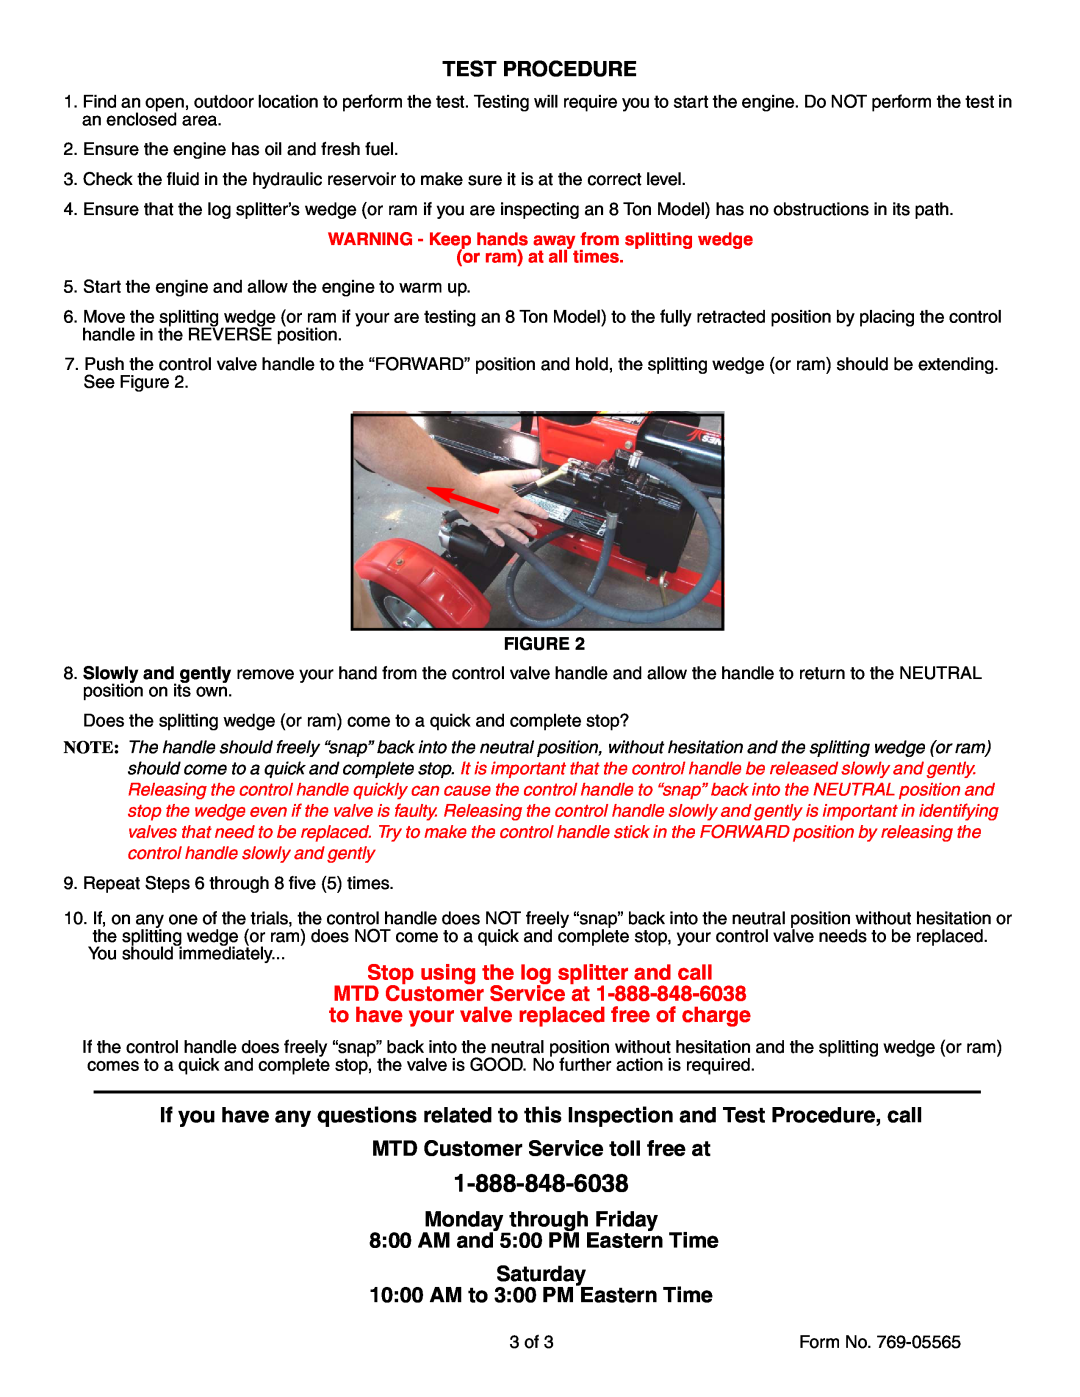 MTD 24AD598A010 Stop using the log splitter and call, WARNING - Keep hands away from splitting wedge, or ram at all times 